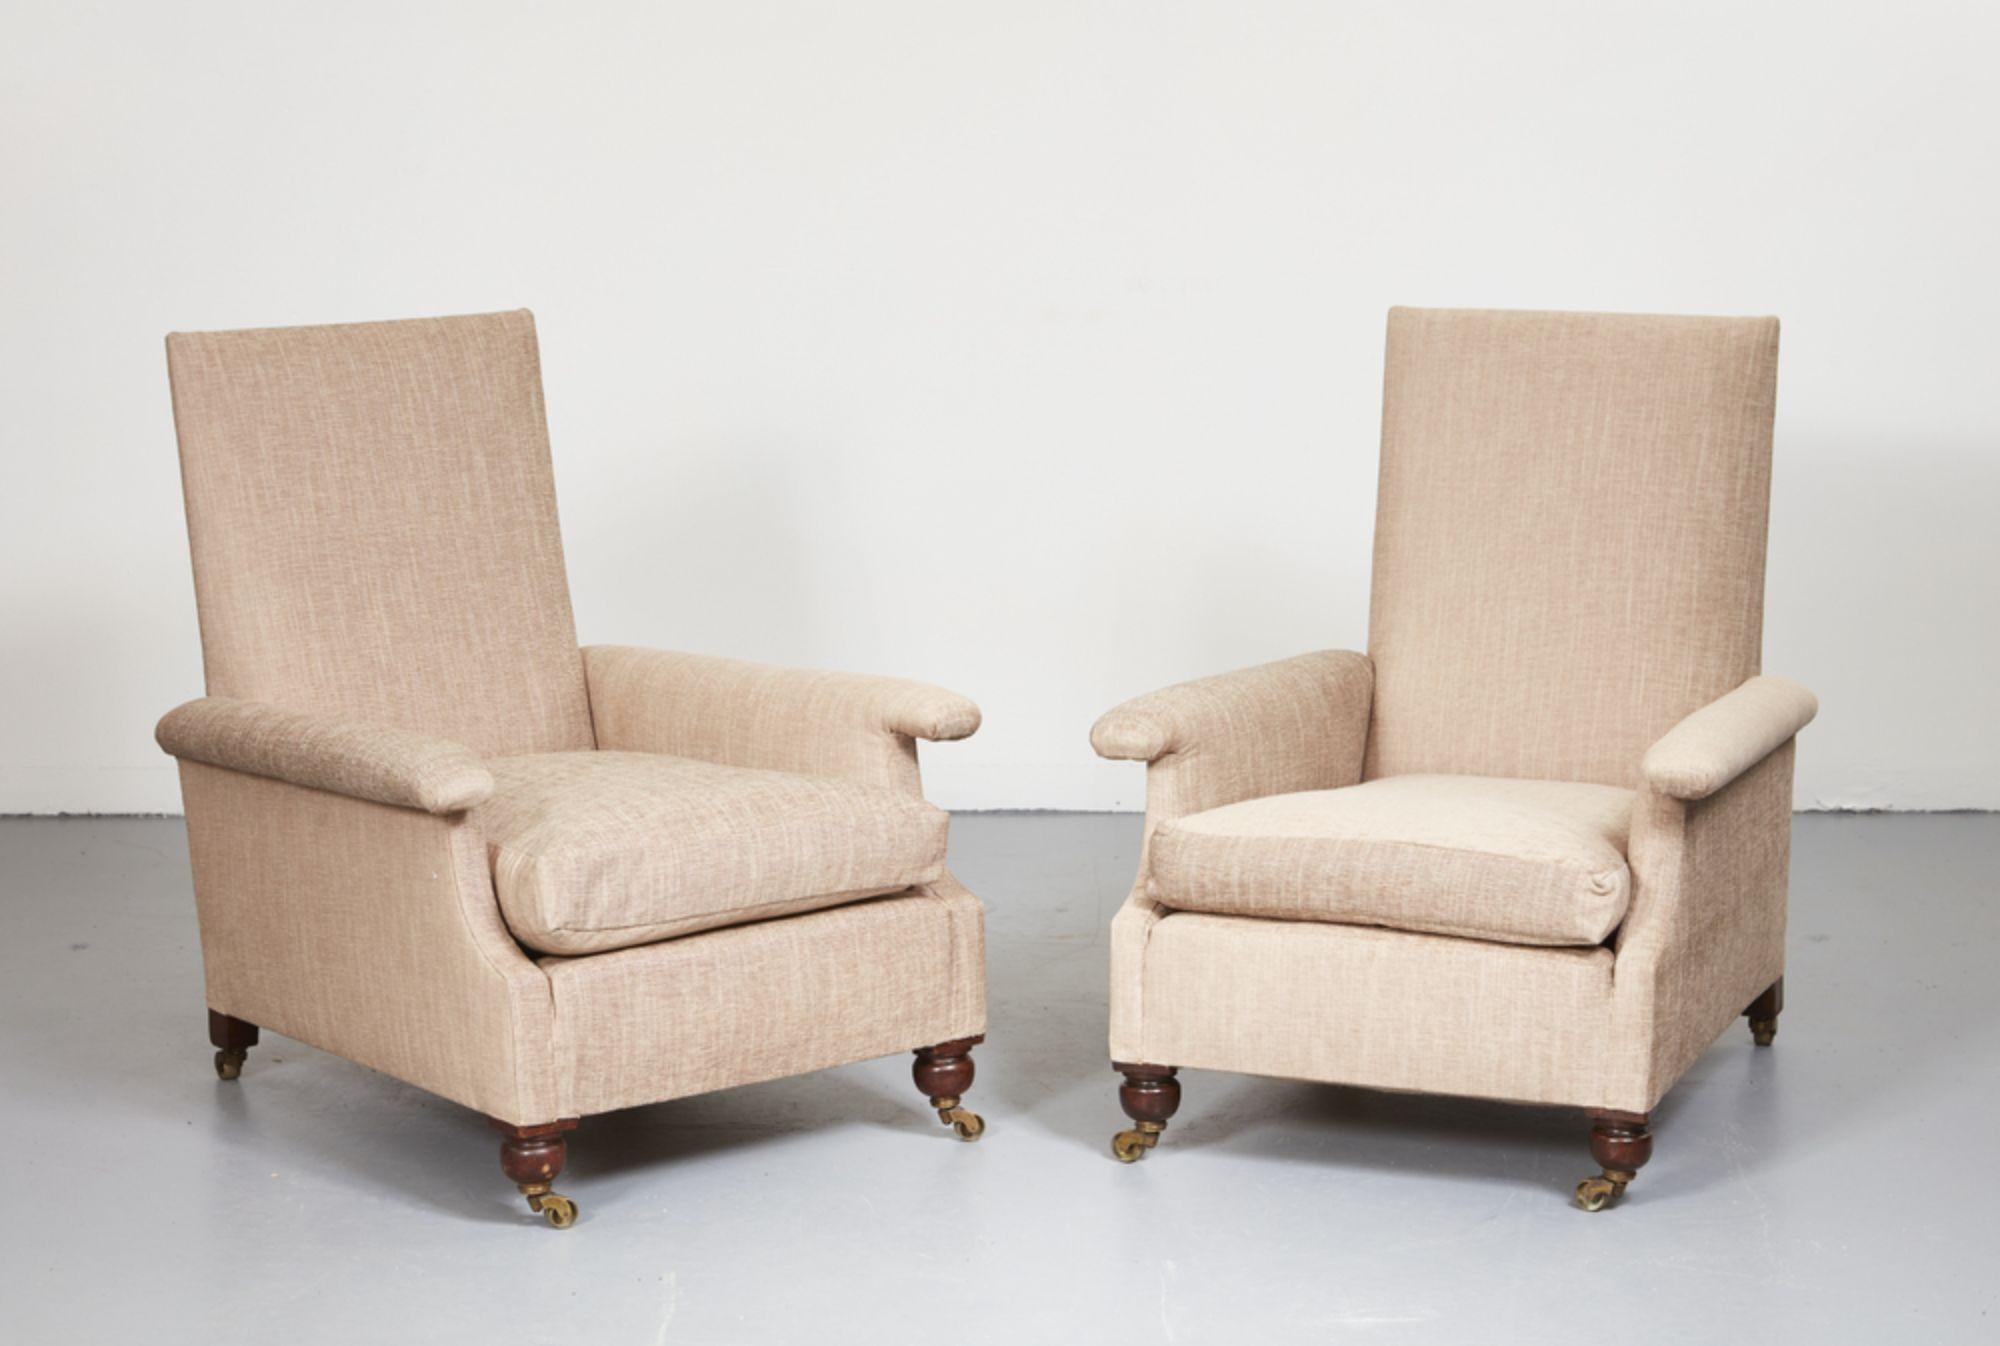 Pair of Generously Proportioned English Country House Club Chairs In Good Condition For Sale In Greenwich, CT